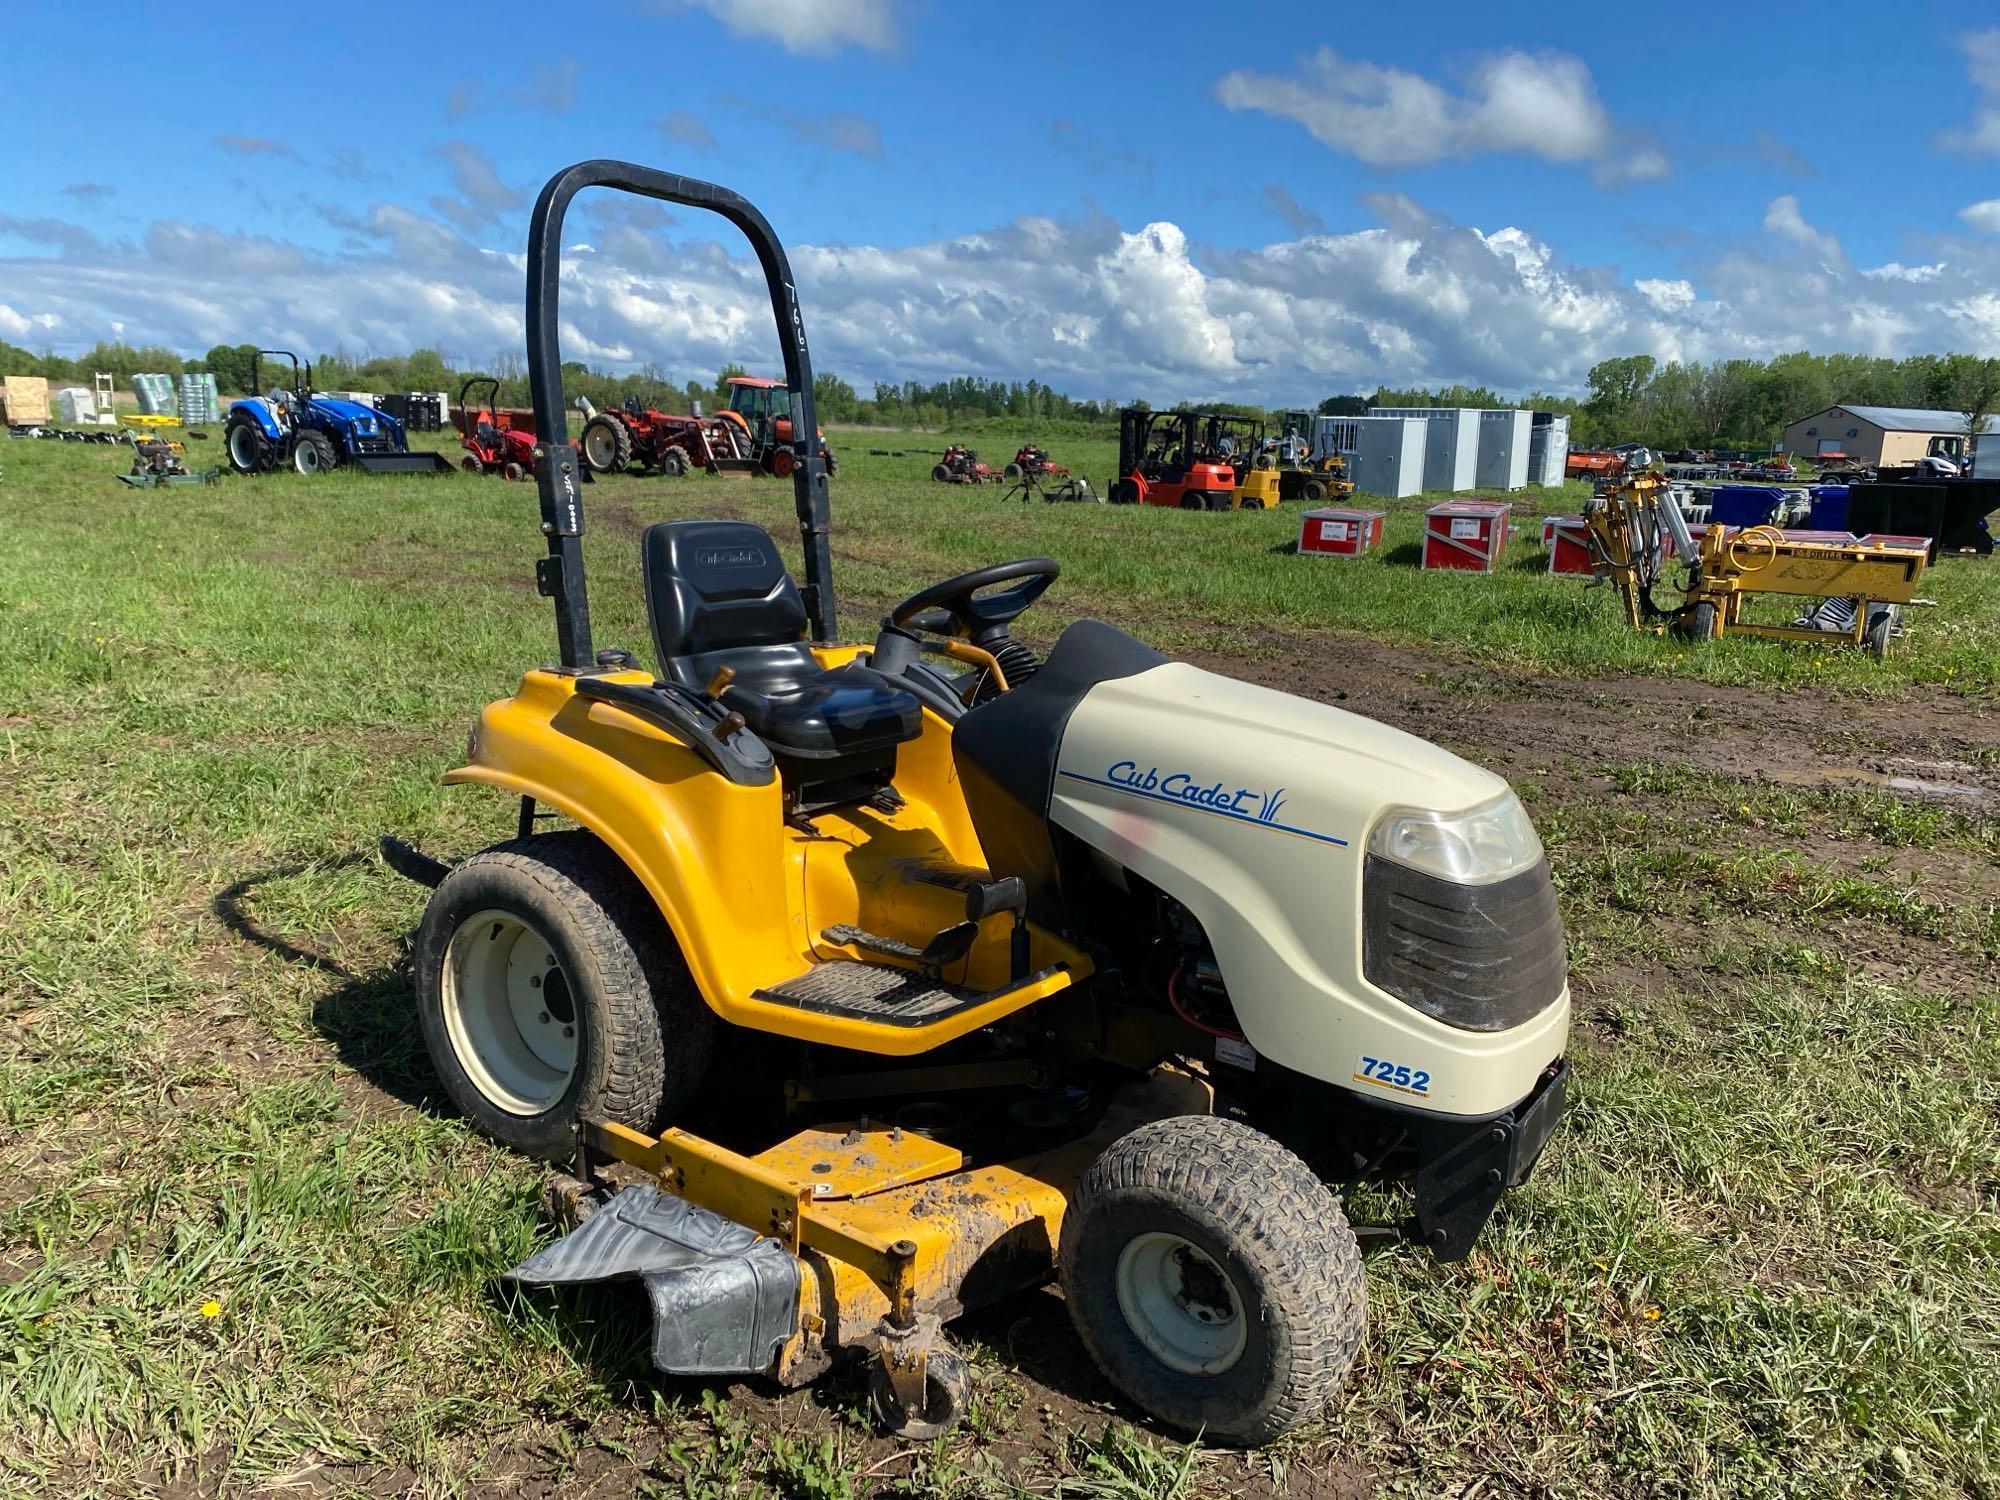 CUB CADET 5252 LAWN & GARDEN TRACTOR SN-1162 powered by gas engine, equipped with hydrostatic, 60in.